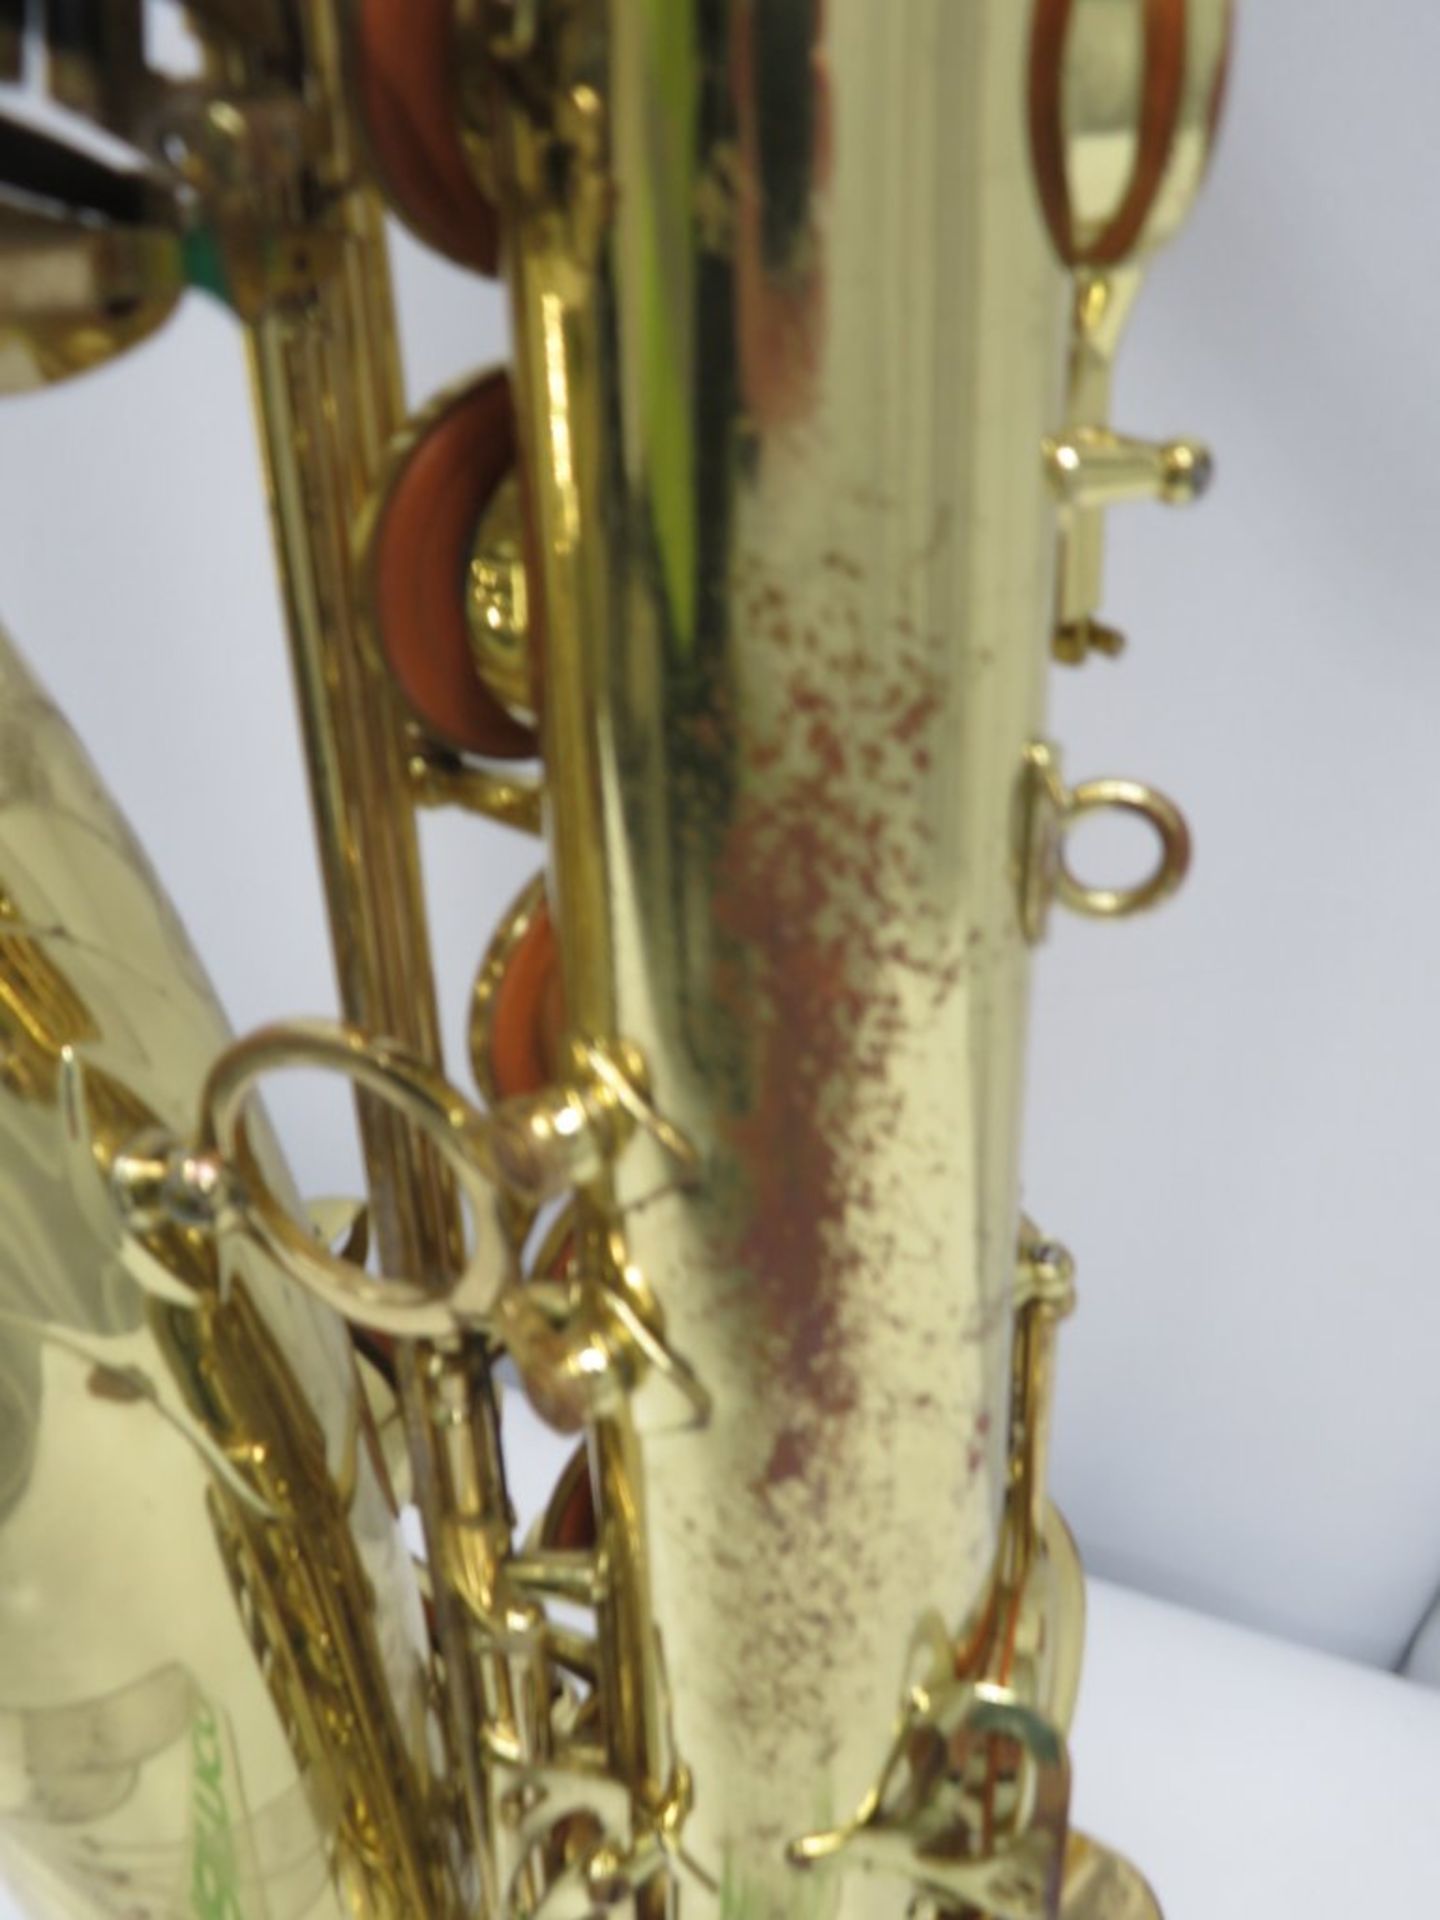 Henri Selmer Super Action 80 Serie 3 Tenor Saxophone With Case. Serial Number: N.657313. - Image 12 of 18